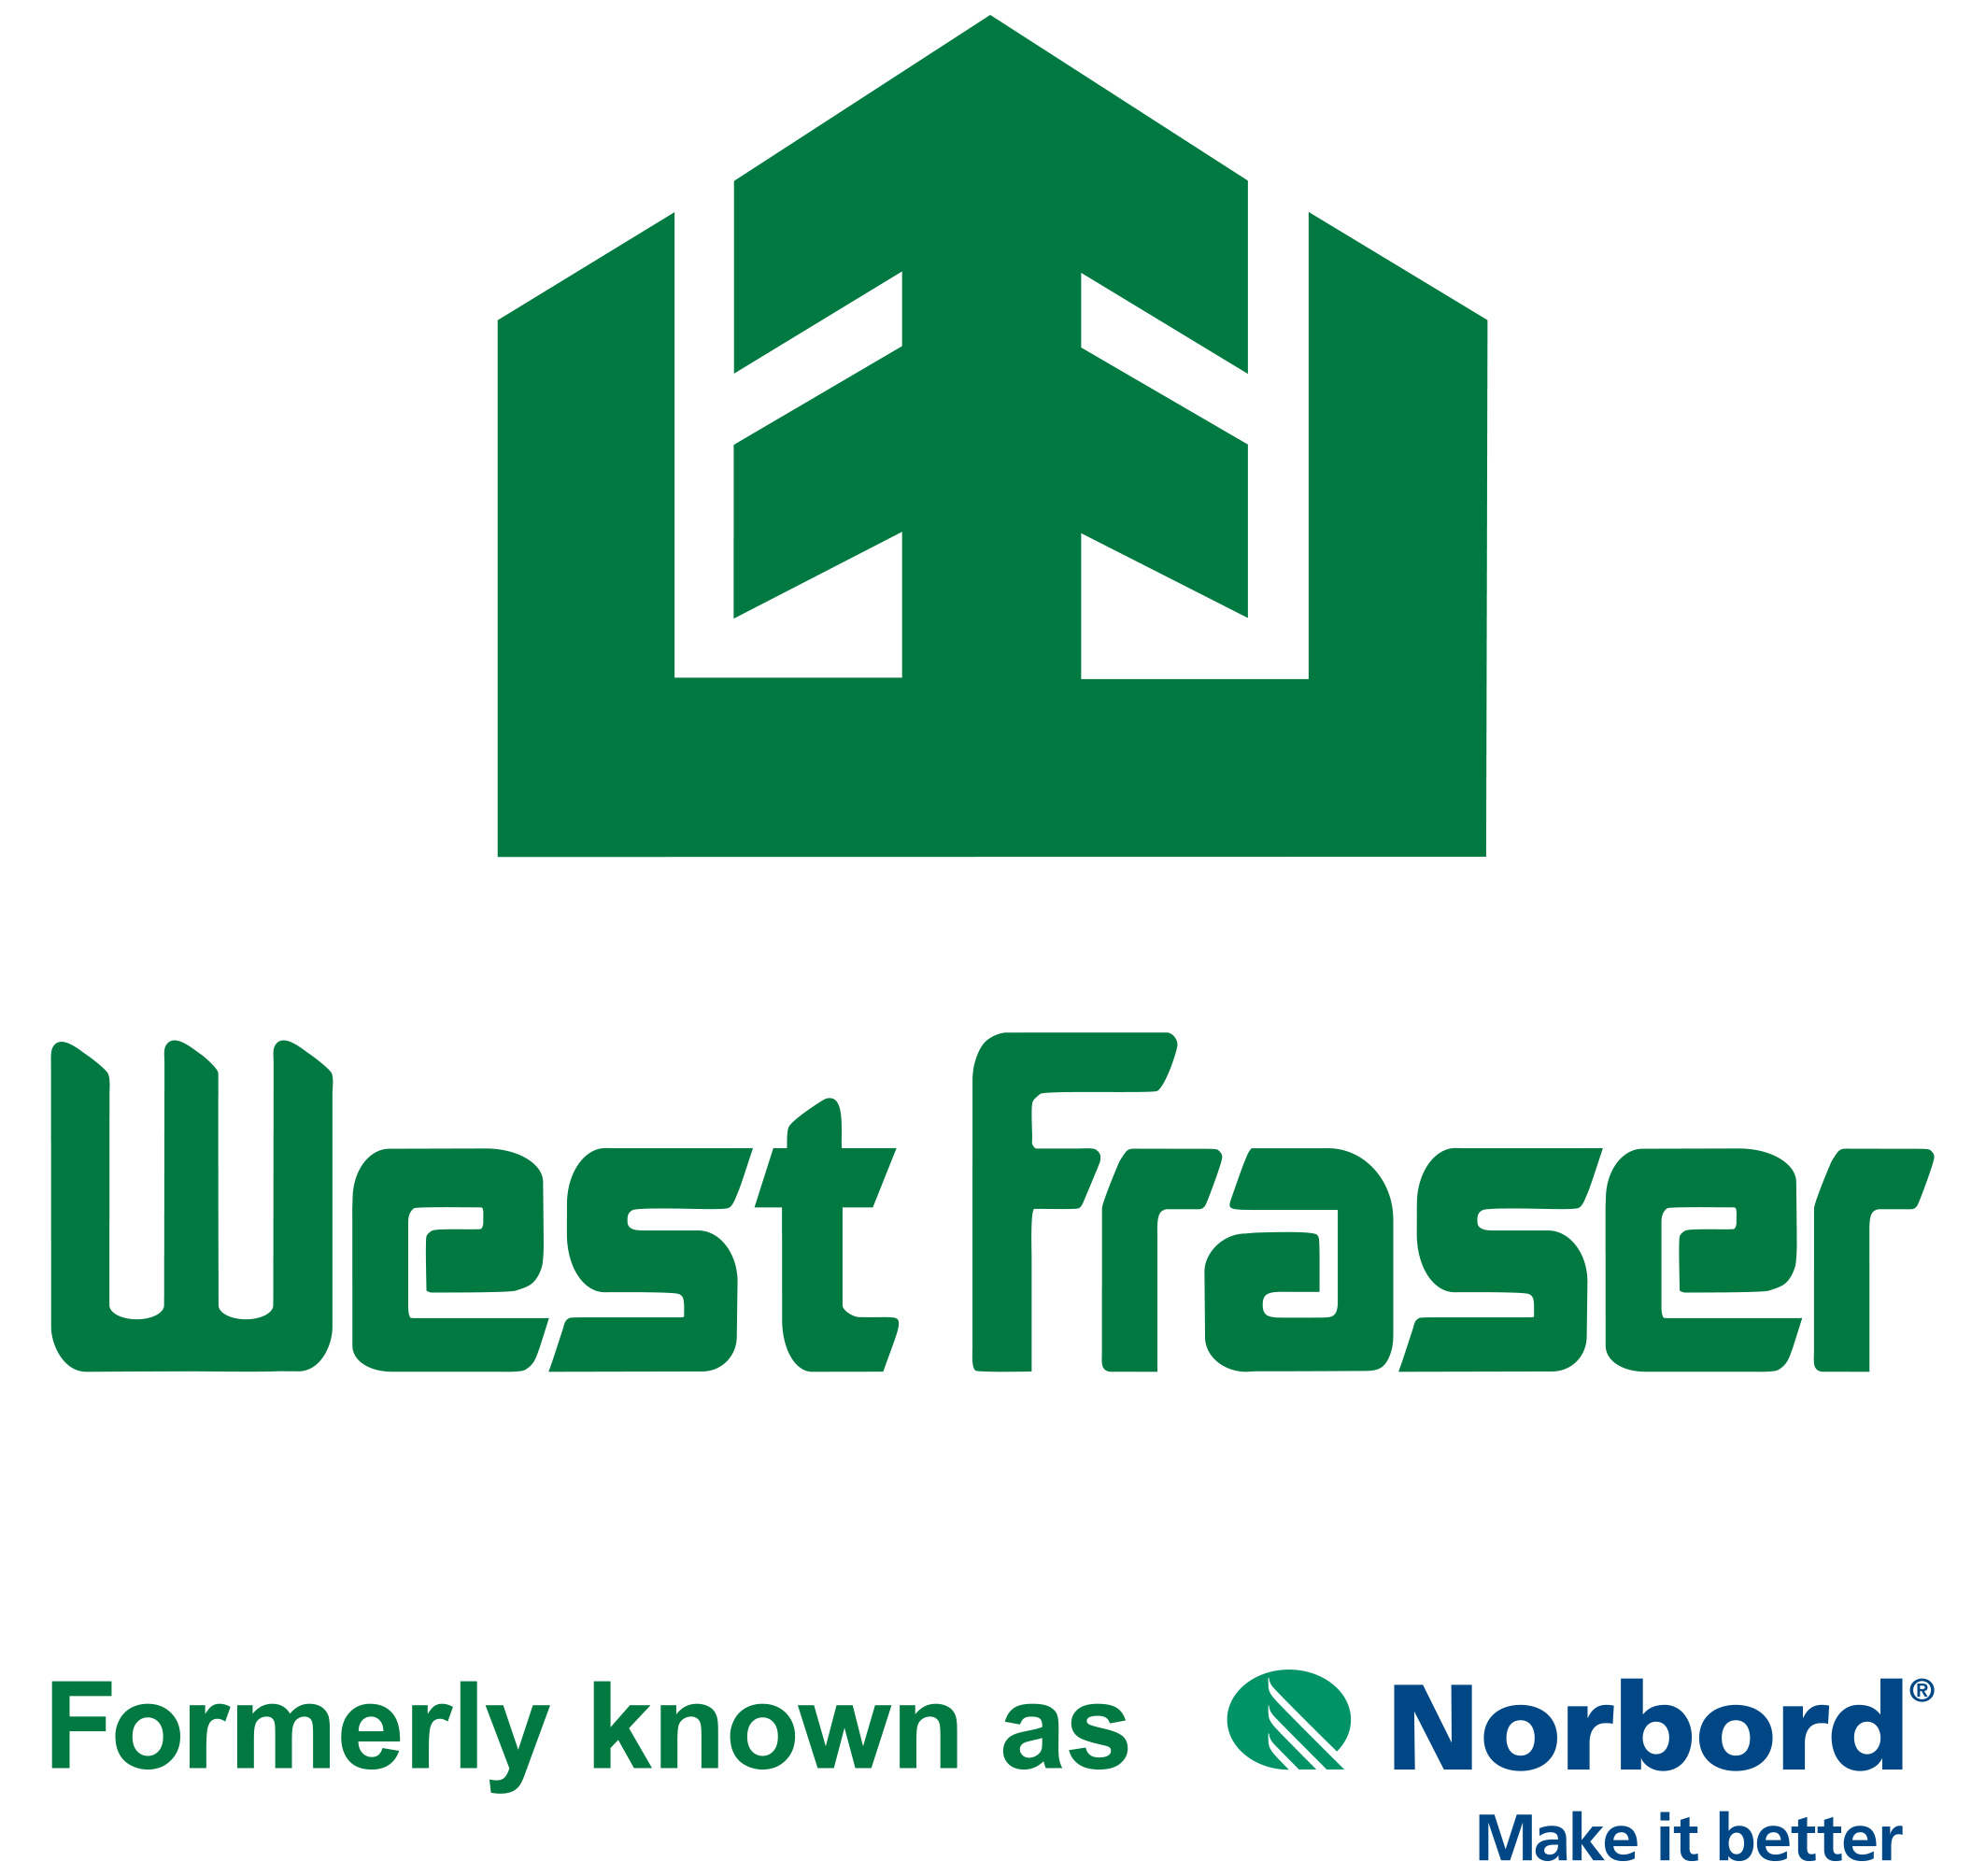 West Fraser formerly known as Norbord_Vertical_zonder witruimte.jpg